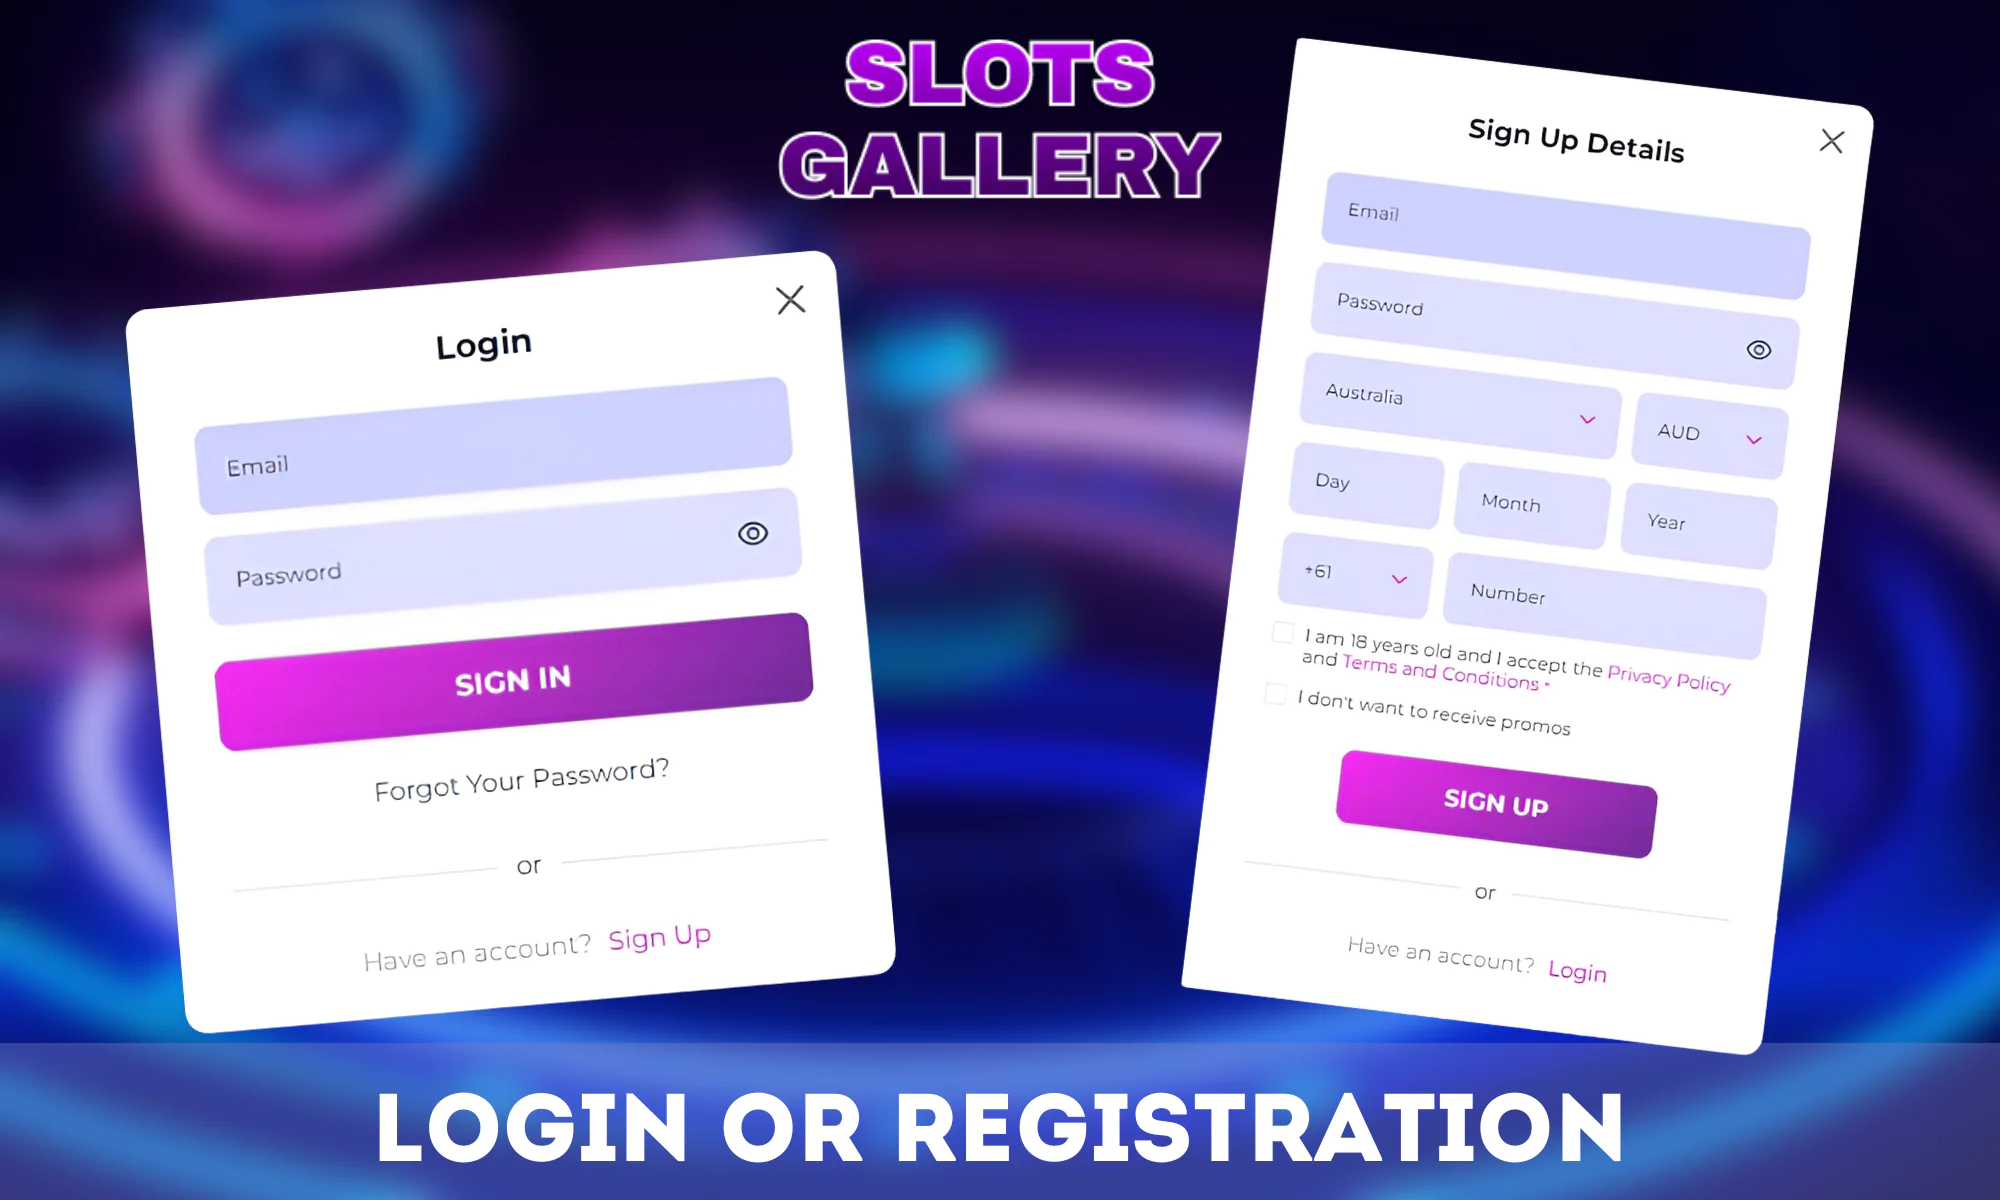 Register or log in to your Slots gallery account